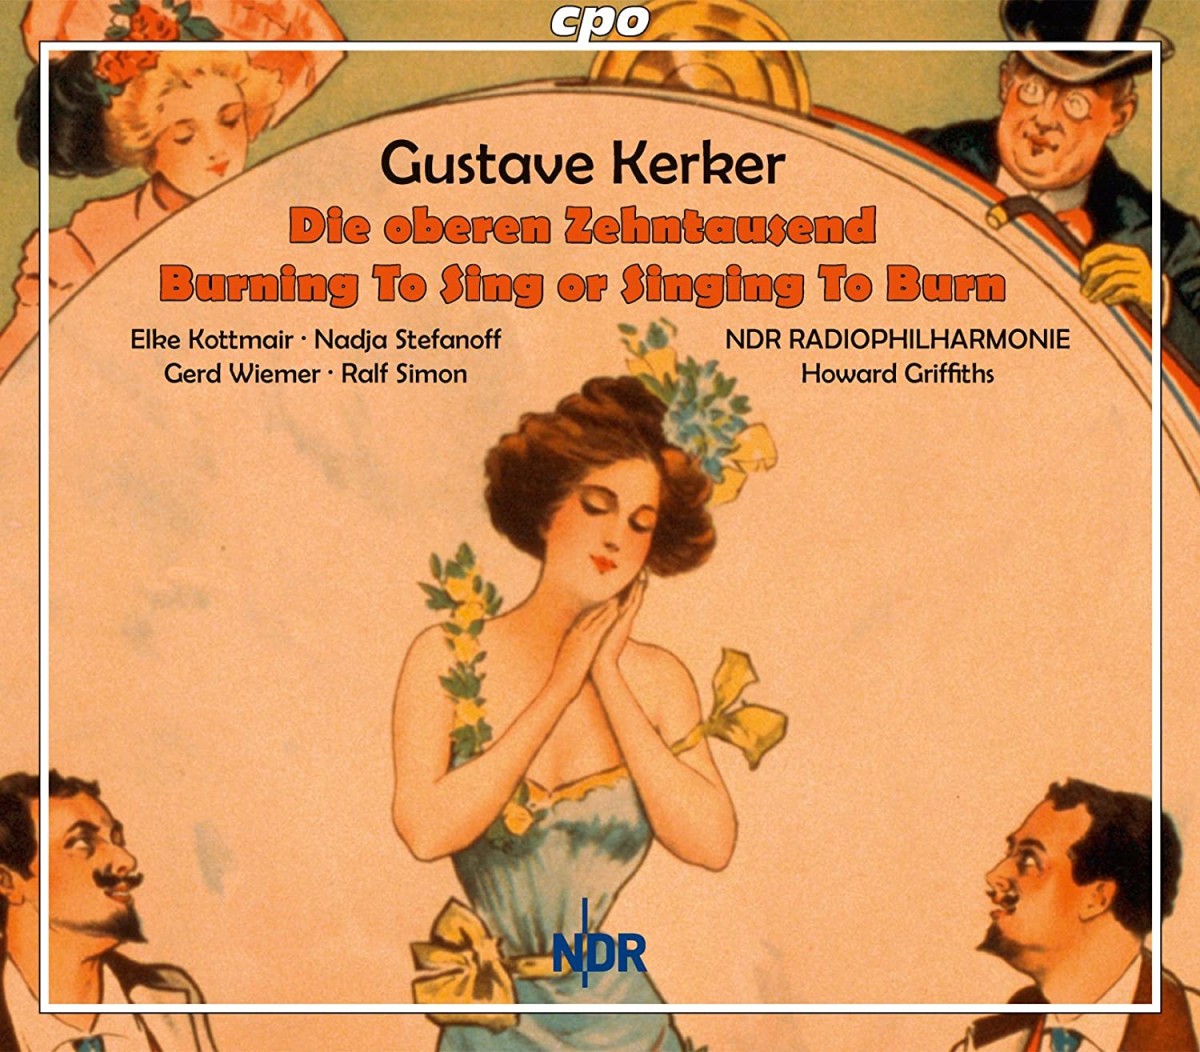 Kerker's "Die oberen Zehntausend" combined with "Burning to Sing" on a double disc album. (Photo: cpo)